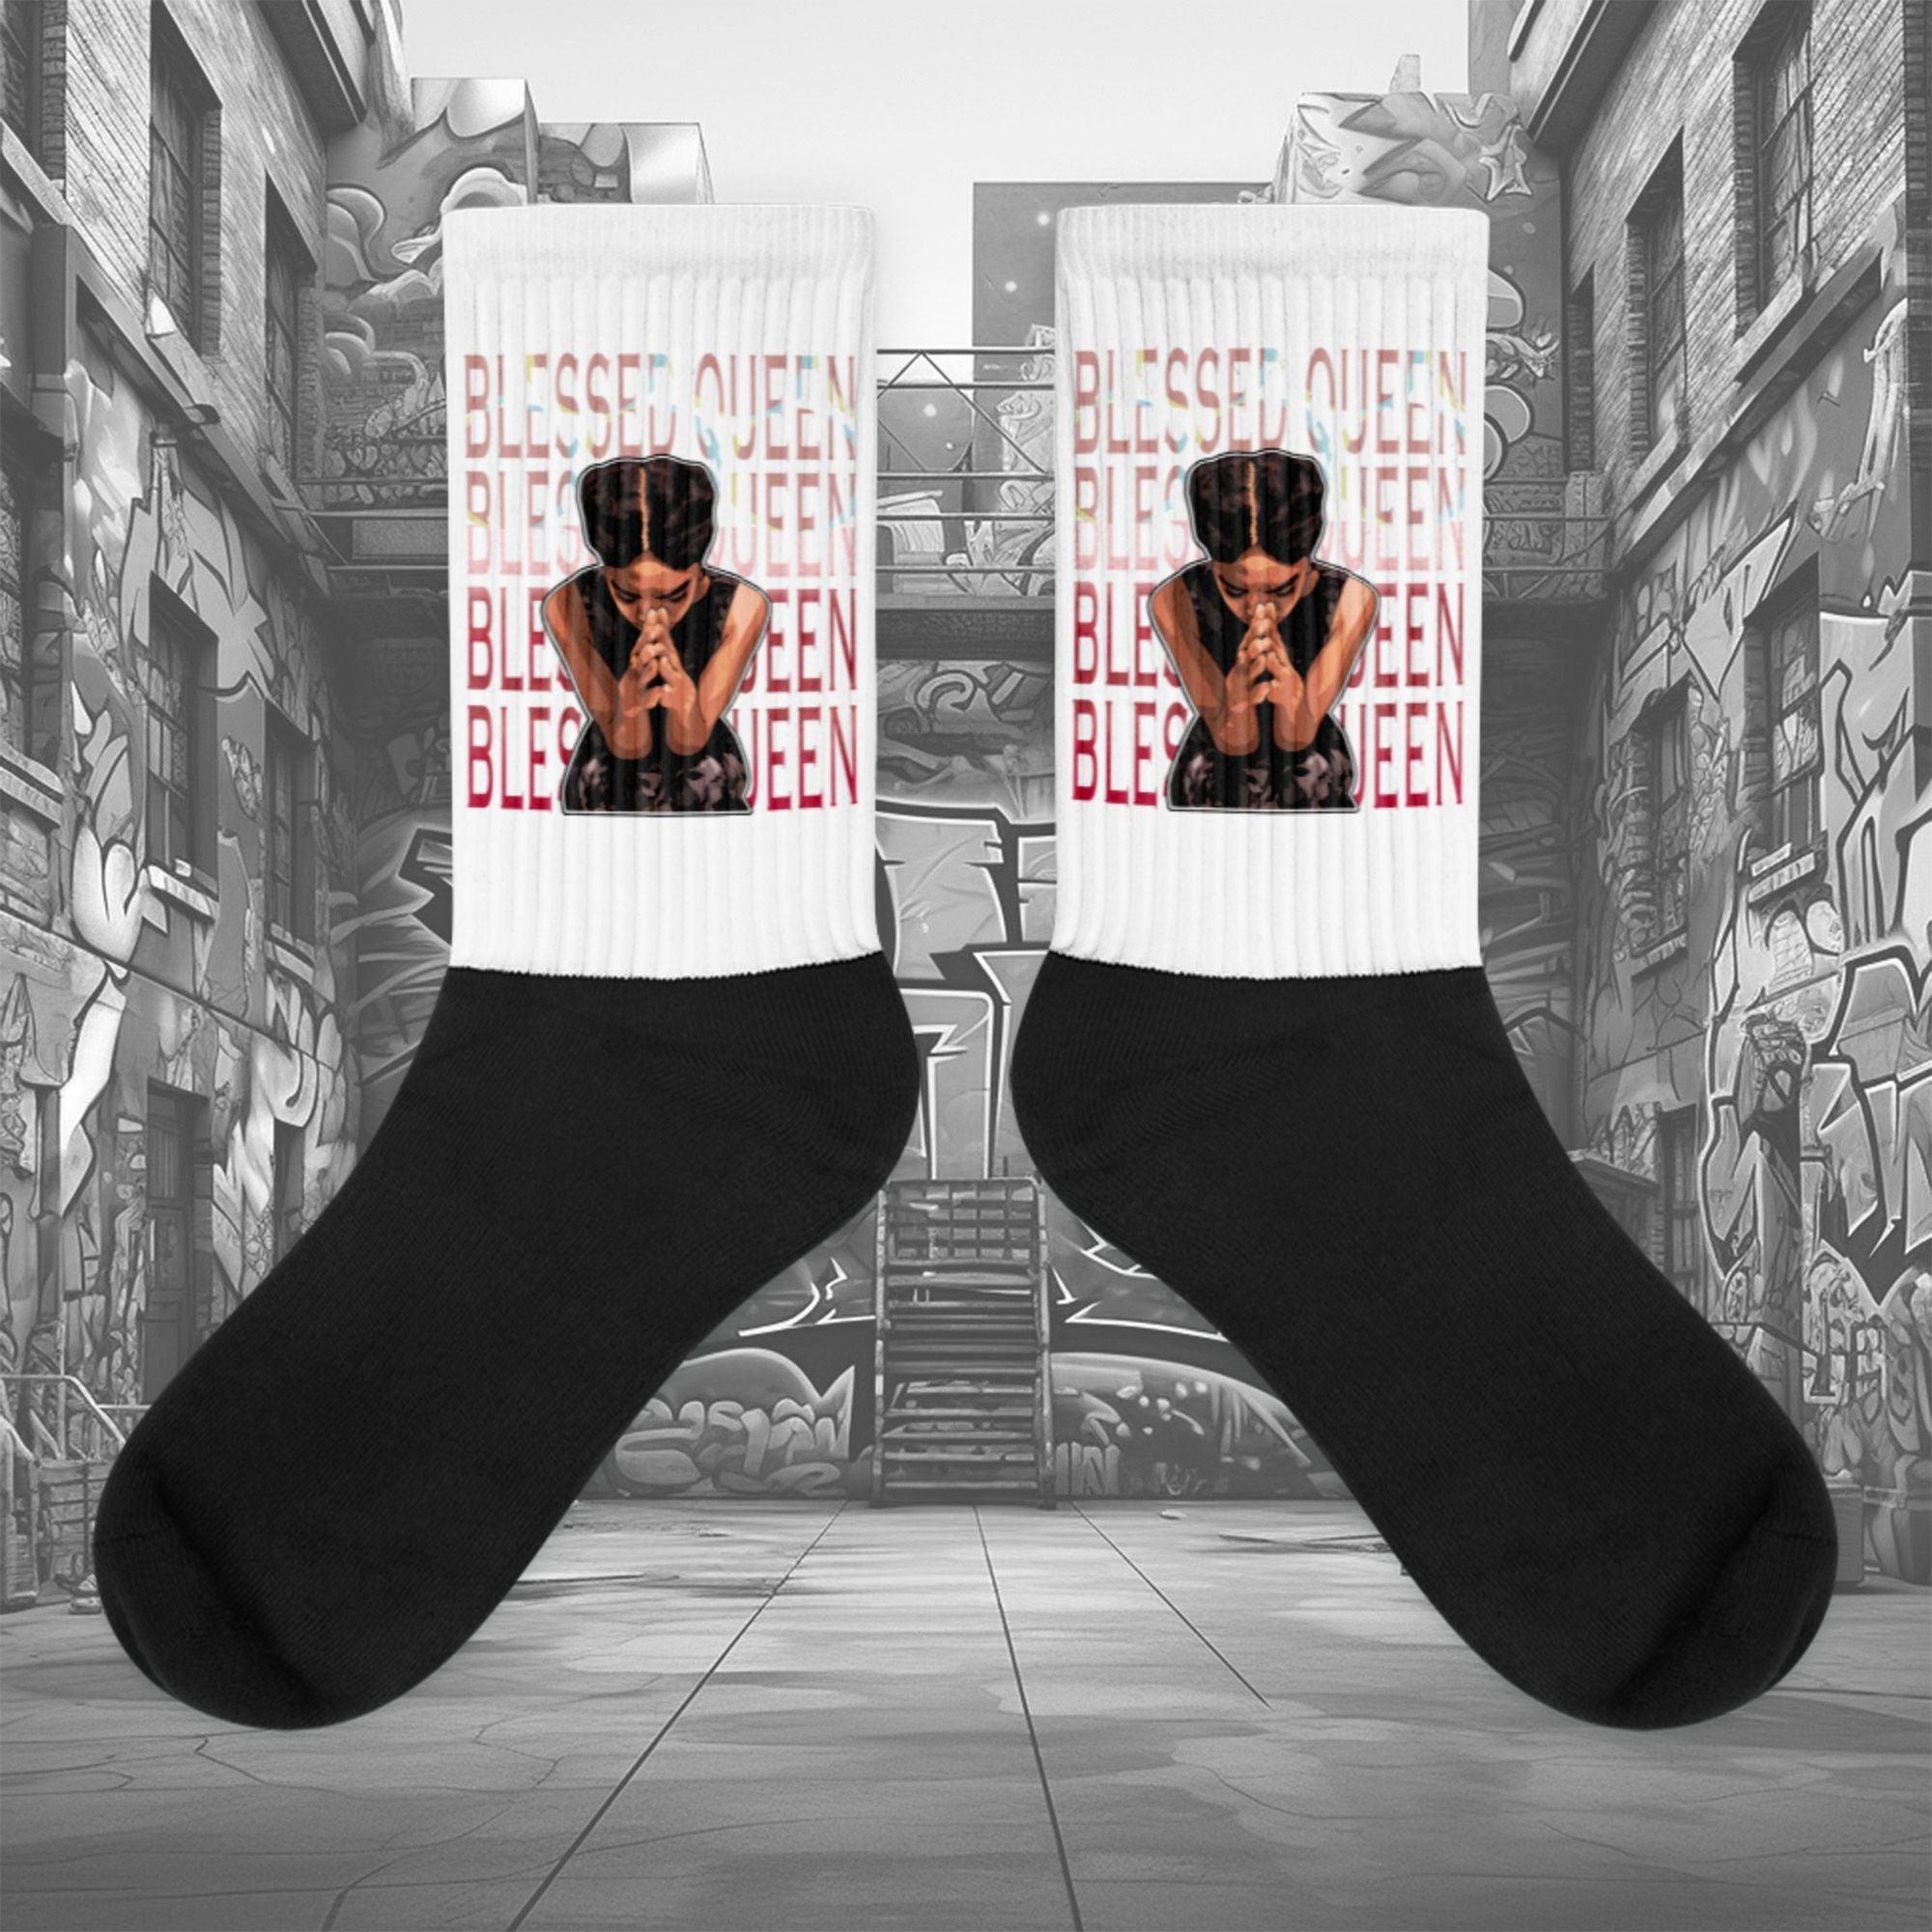  Showcases the view of the socks, highlighting the vibrant 'Blessed Queen' design, which perfectly complements the Air Jordan 1 Retro High OG Next Chapter Spider-Verse sneakers. The intricate pattern and color scheme inspired by the Spider-Verse theme are prominently displayed.  Focusing on the ribbed leg , cusioned bottoms and the snug fit of the socks. This angle provides a clear view of the texture and quality of the material blend.